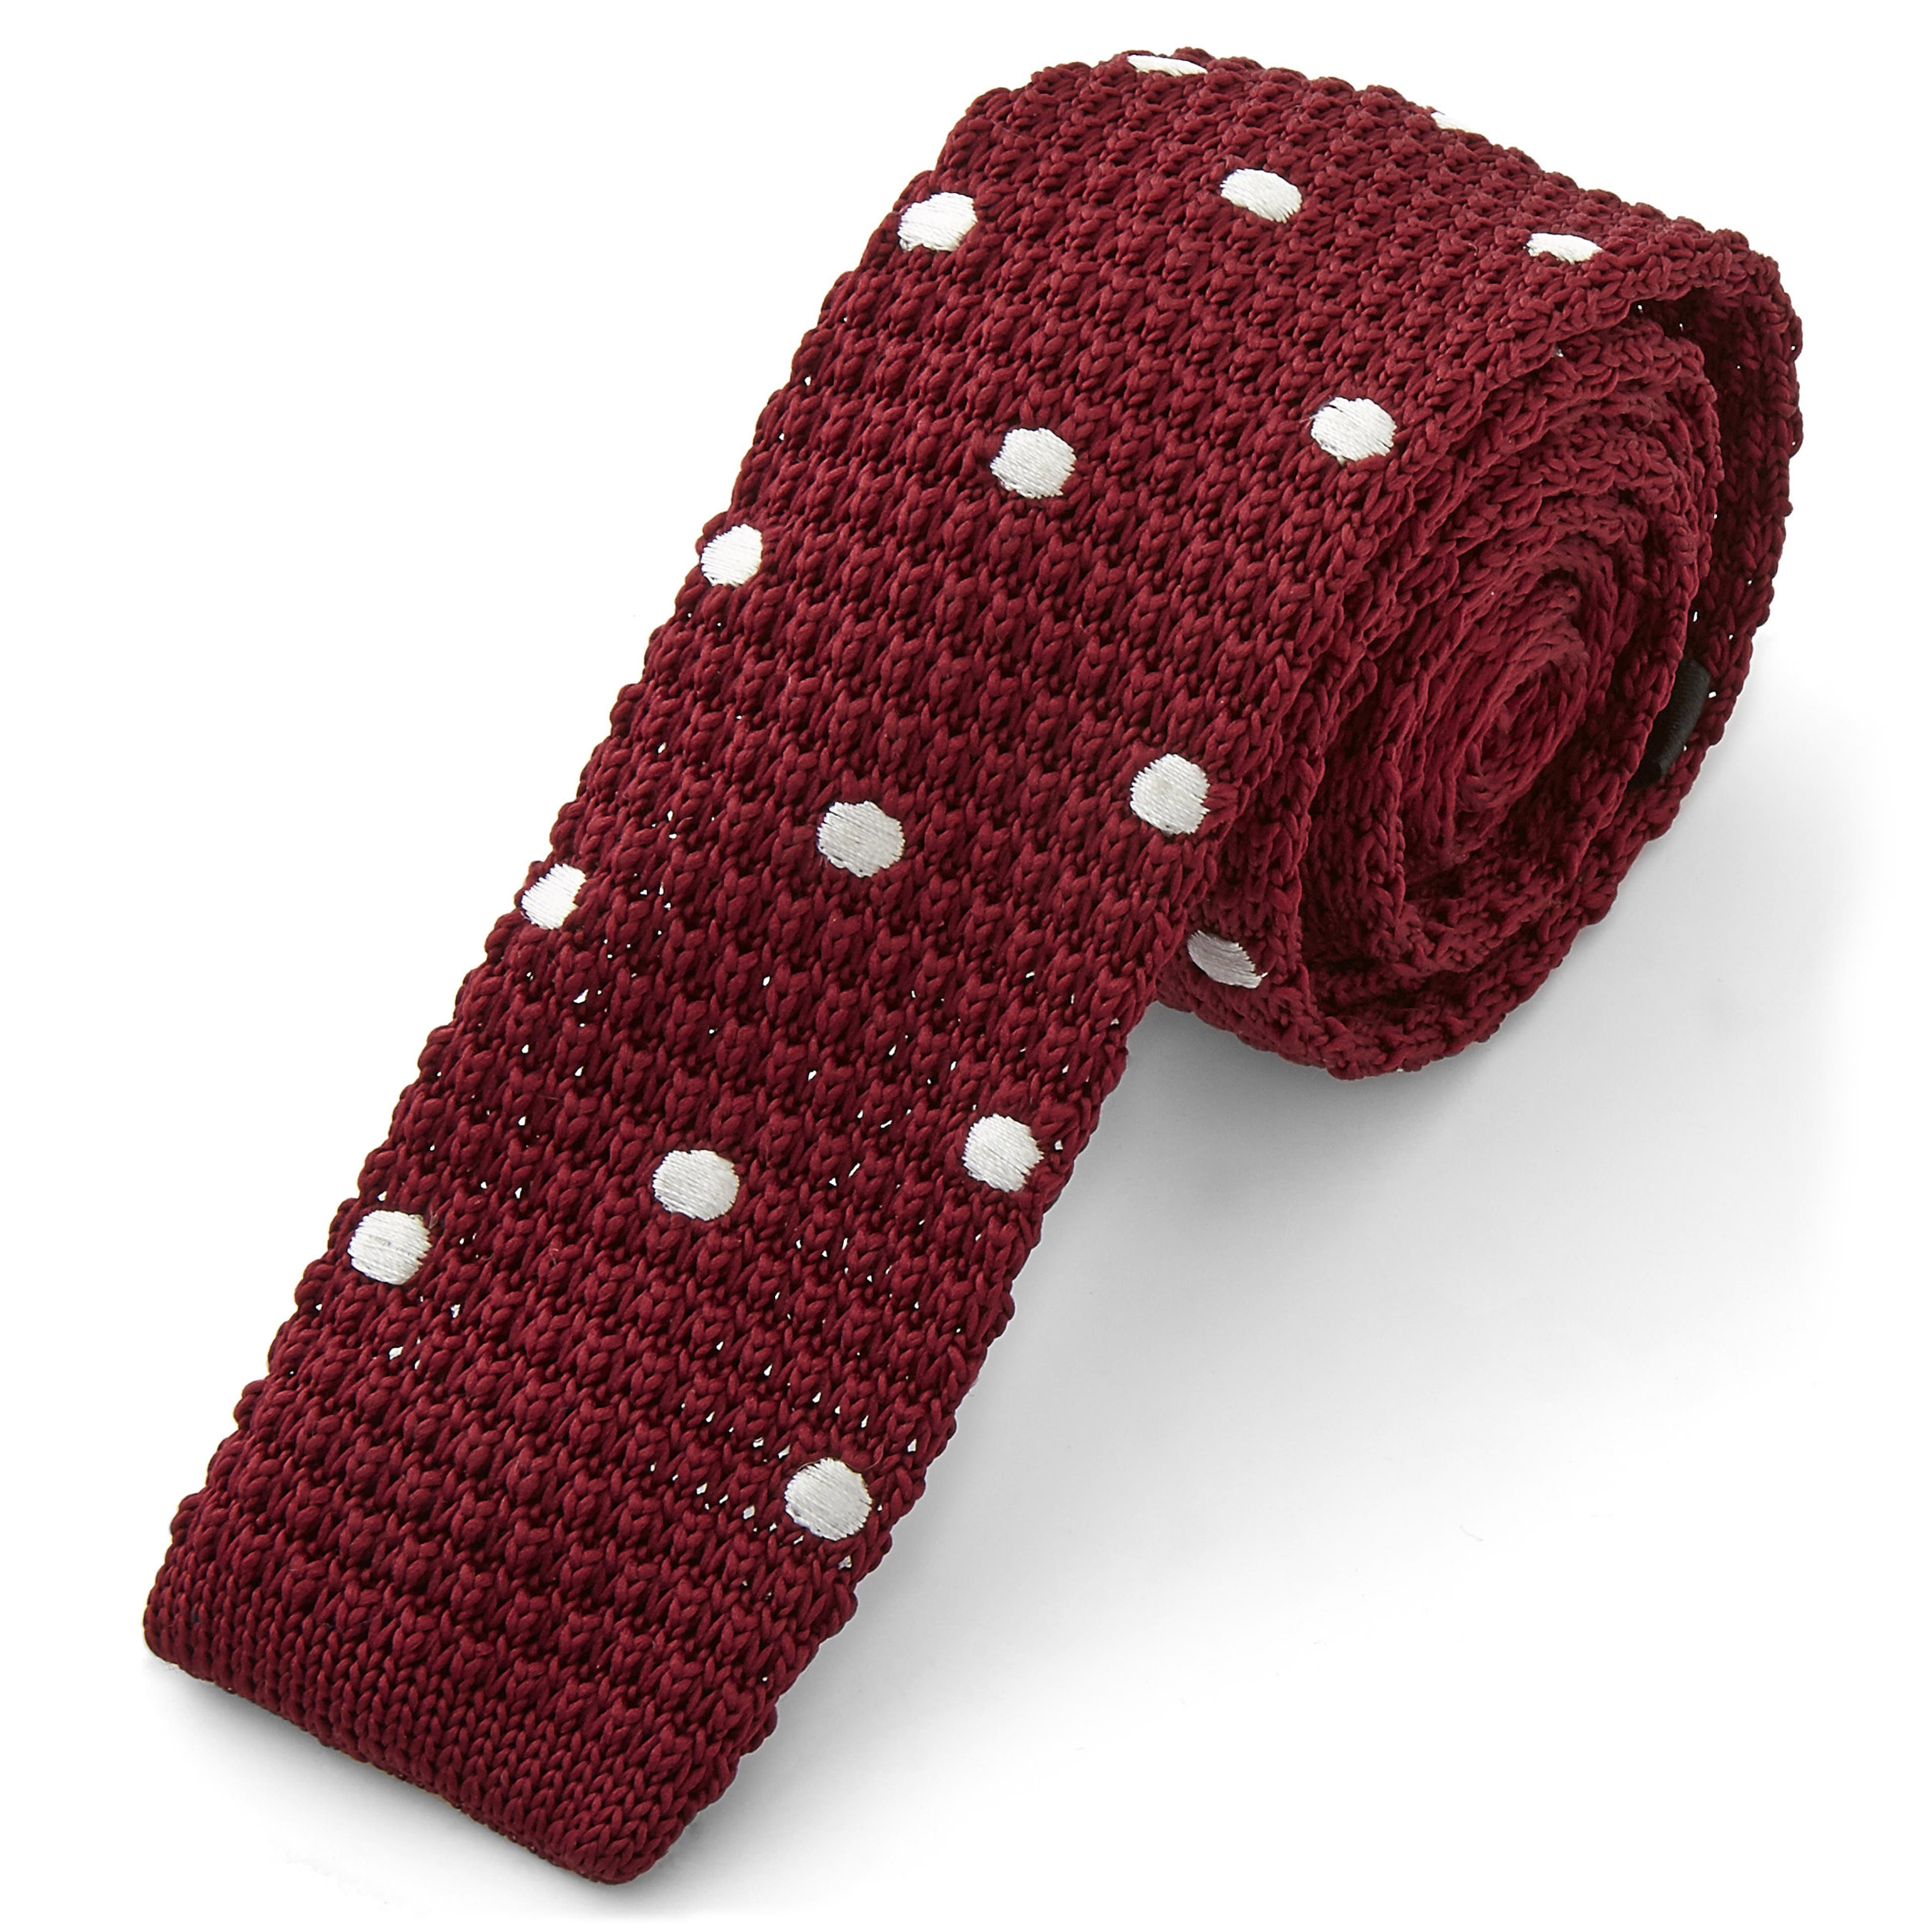 Mahogany & White Dotted Polyester Knitted Tie